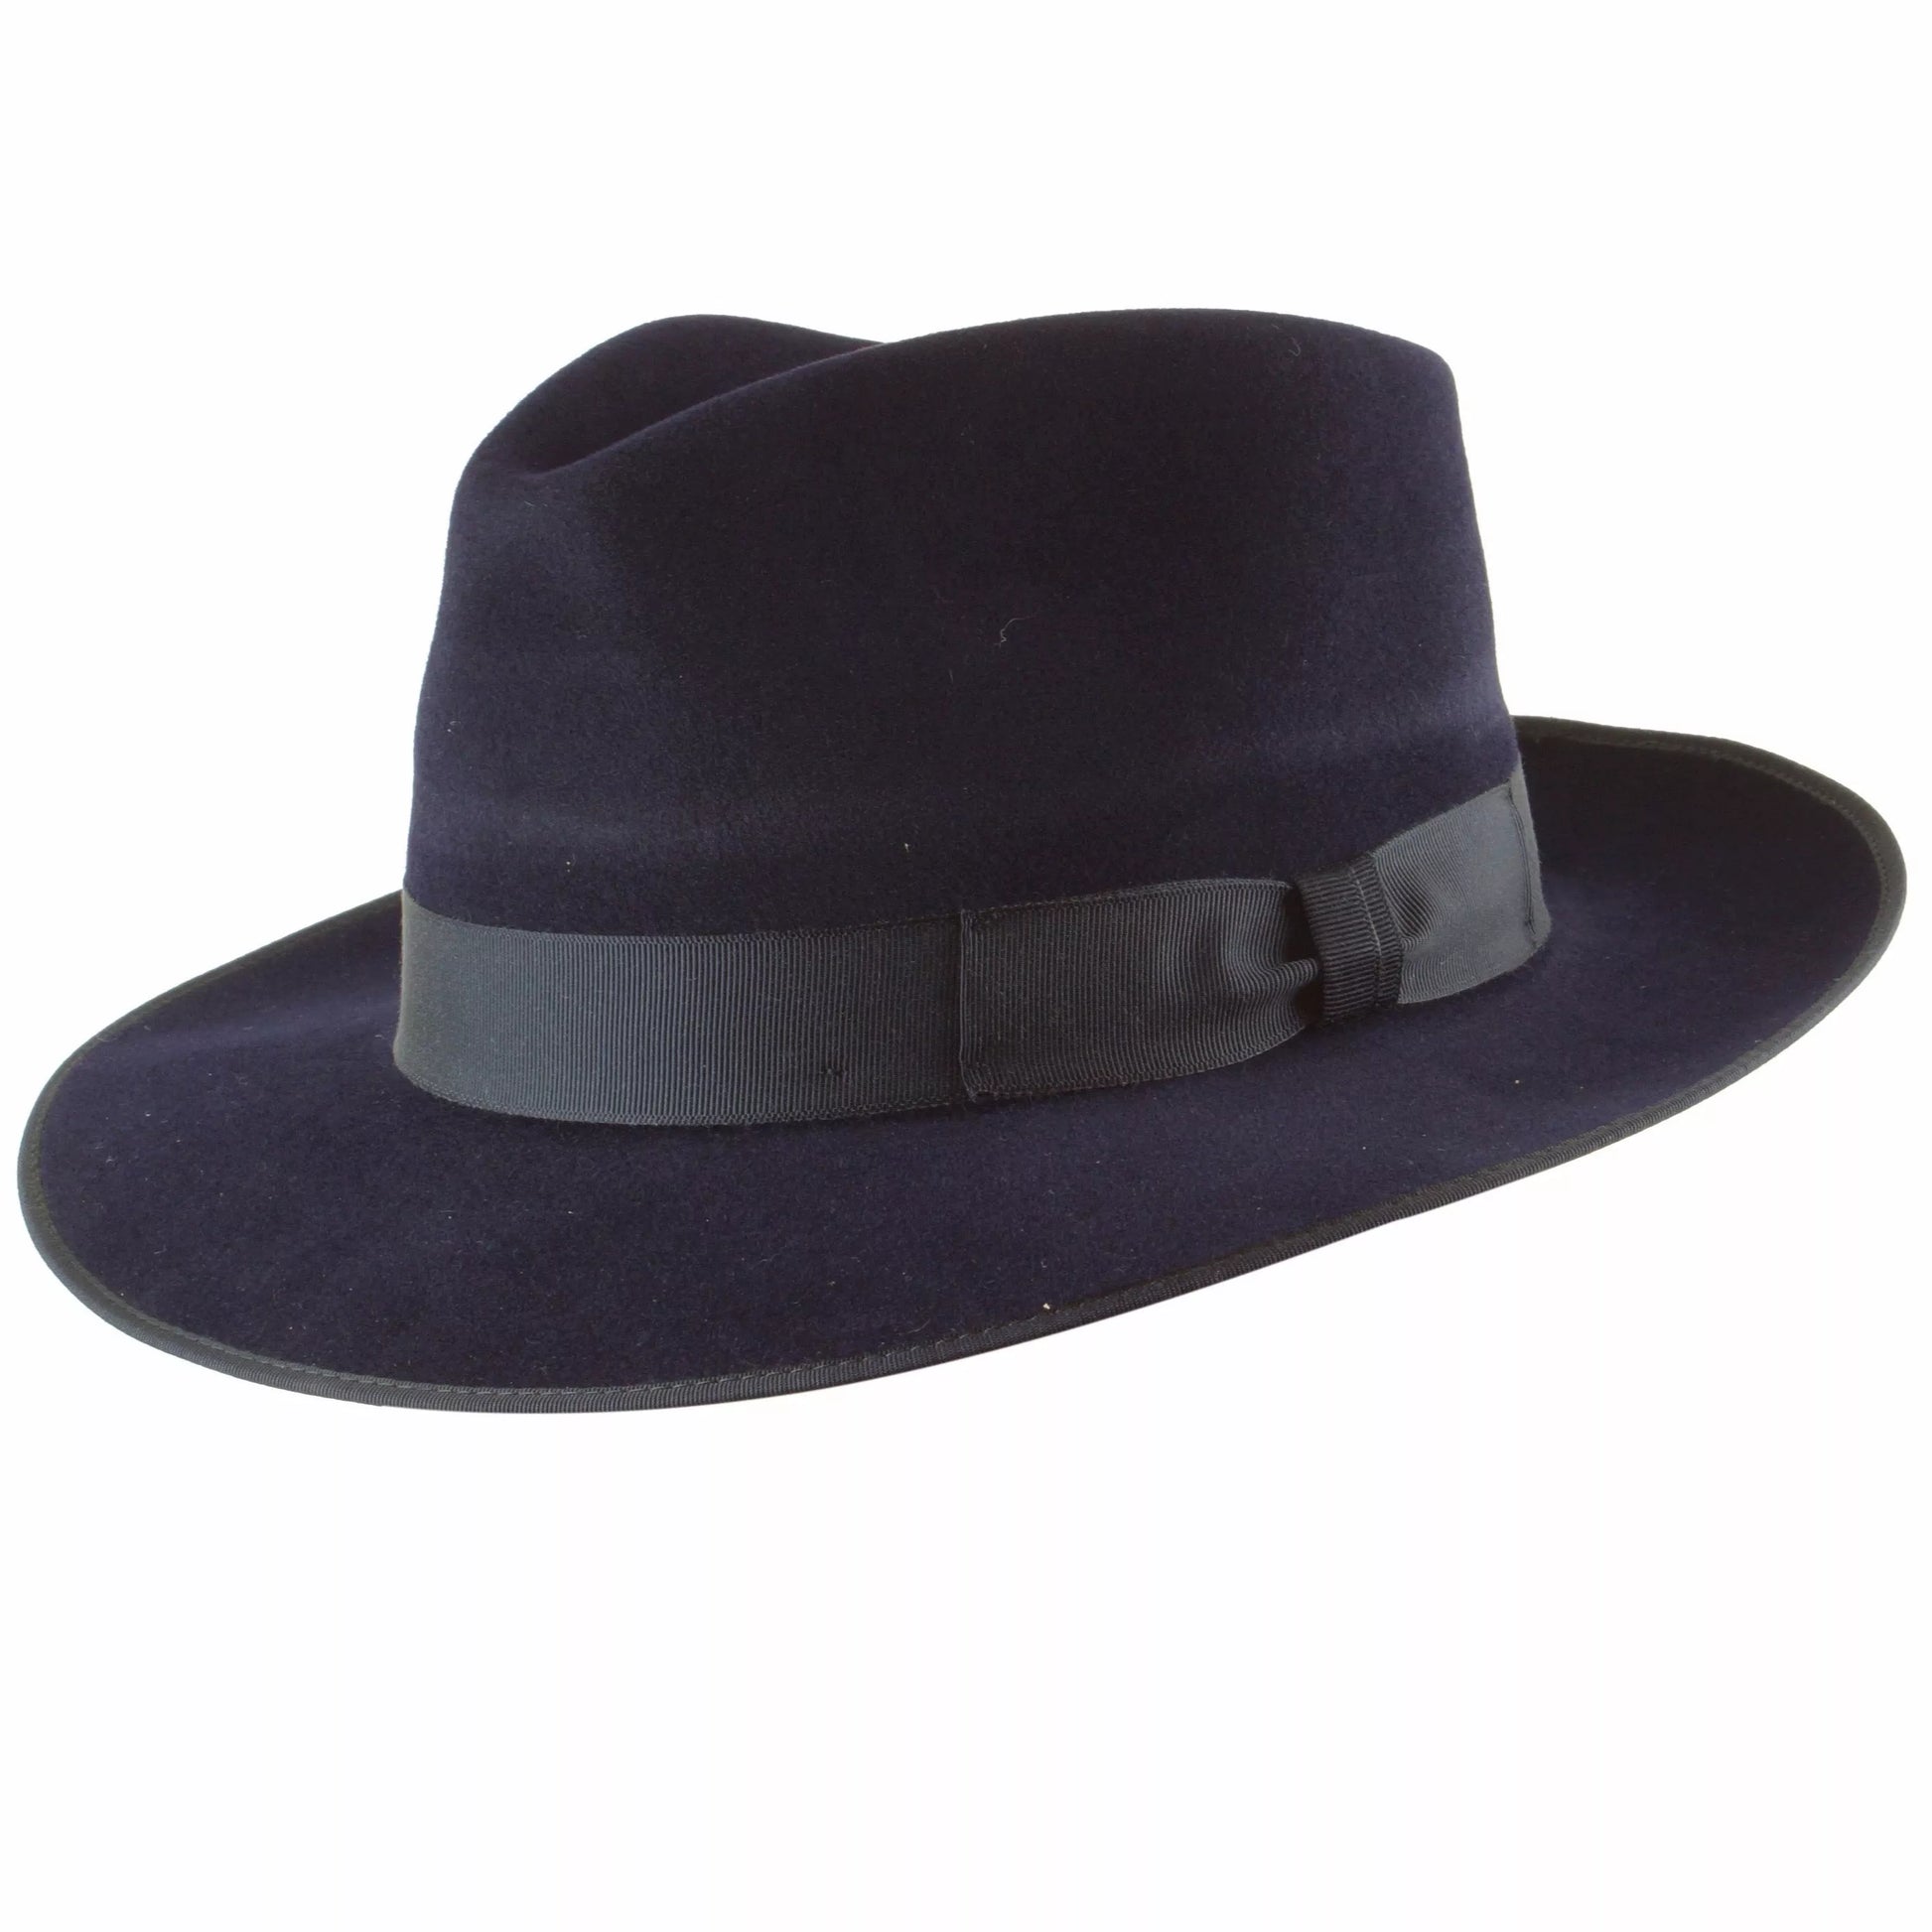 Alfred trilby hat navy